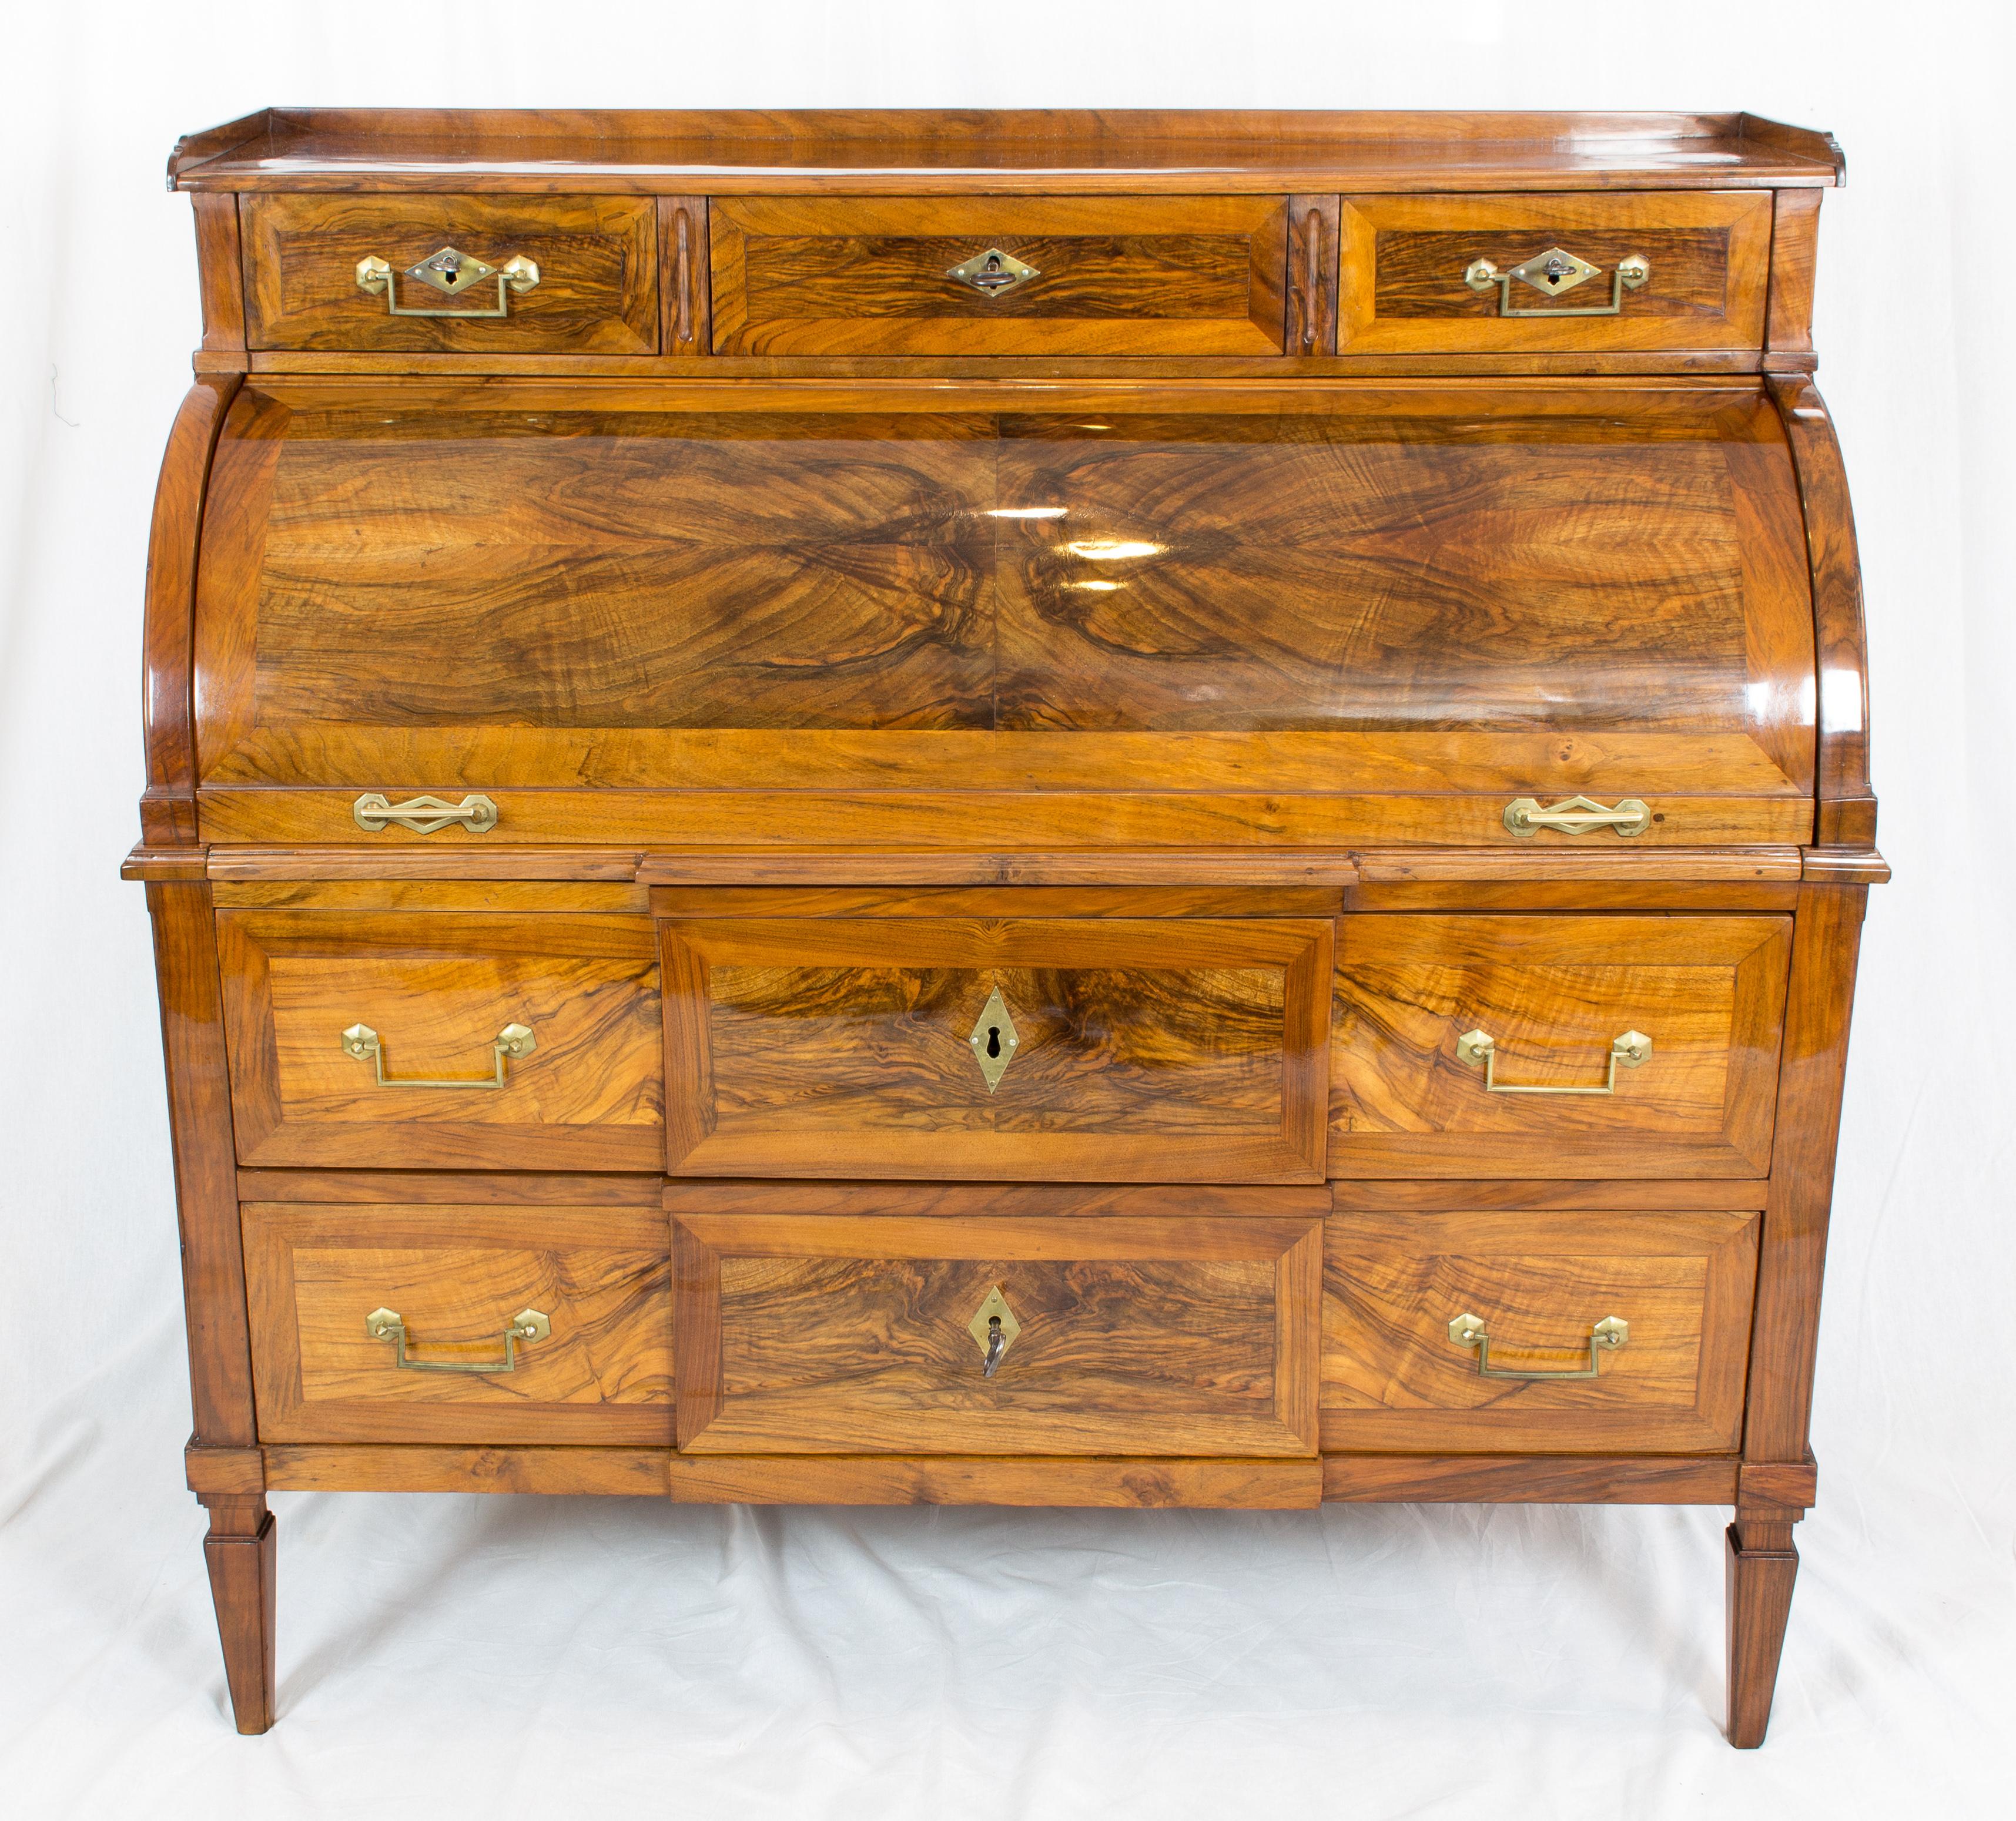 Beautiful cylinder Bureau from the time of Louis XVI circa 1780-1790. The Secretaire is made of thick saw walnut veneer on a pine wood body, the interior is made also with walnut veneer. The writing board can be pulled out and is lockable in closed